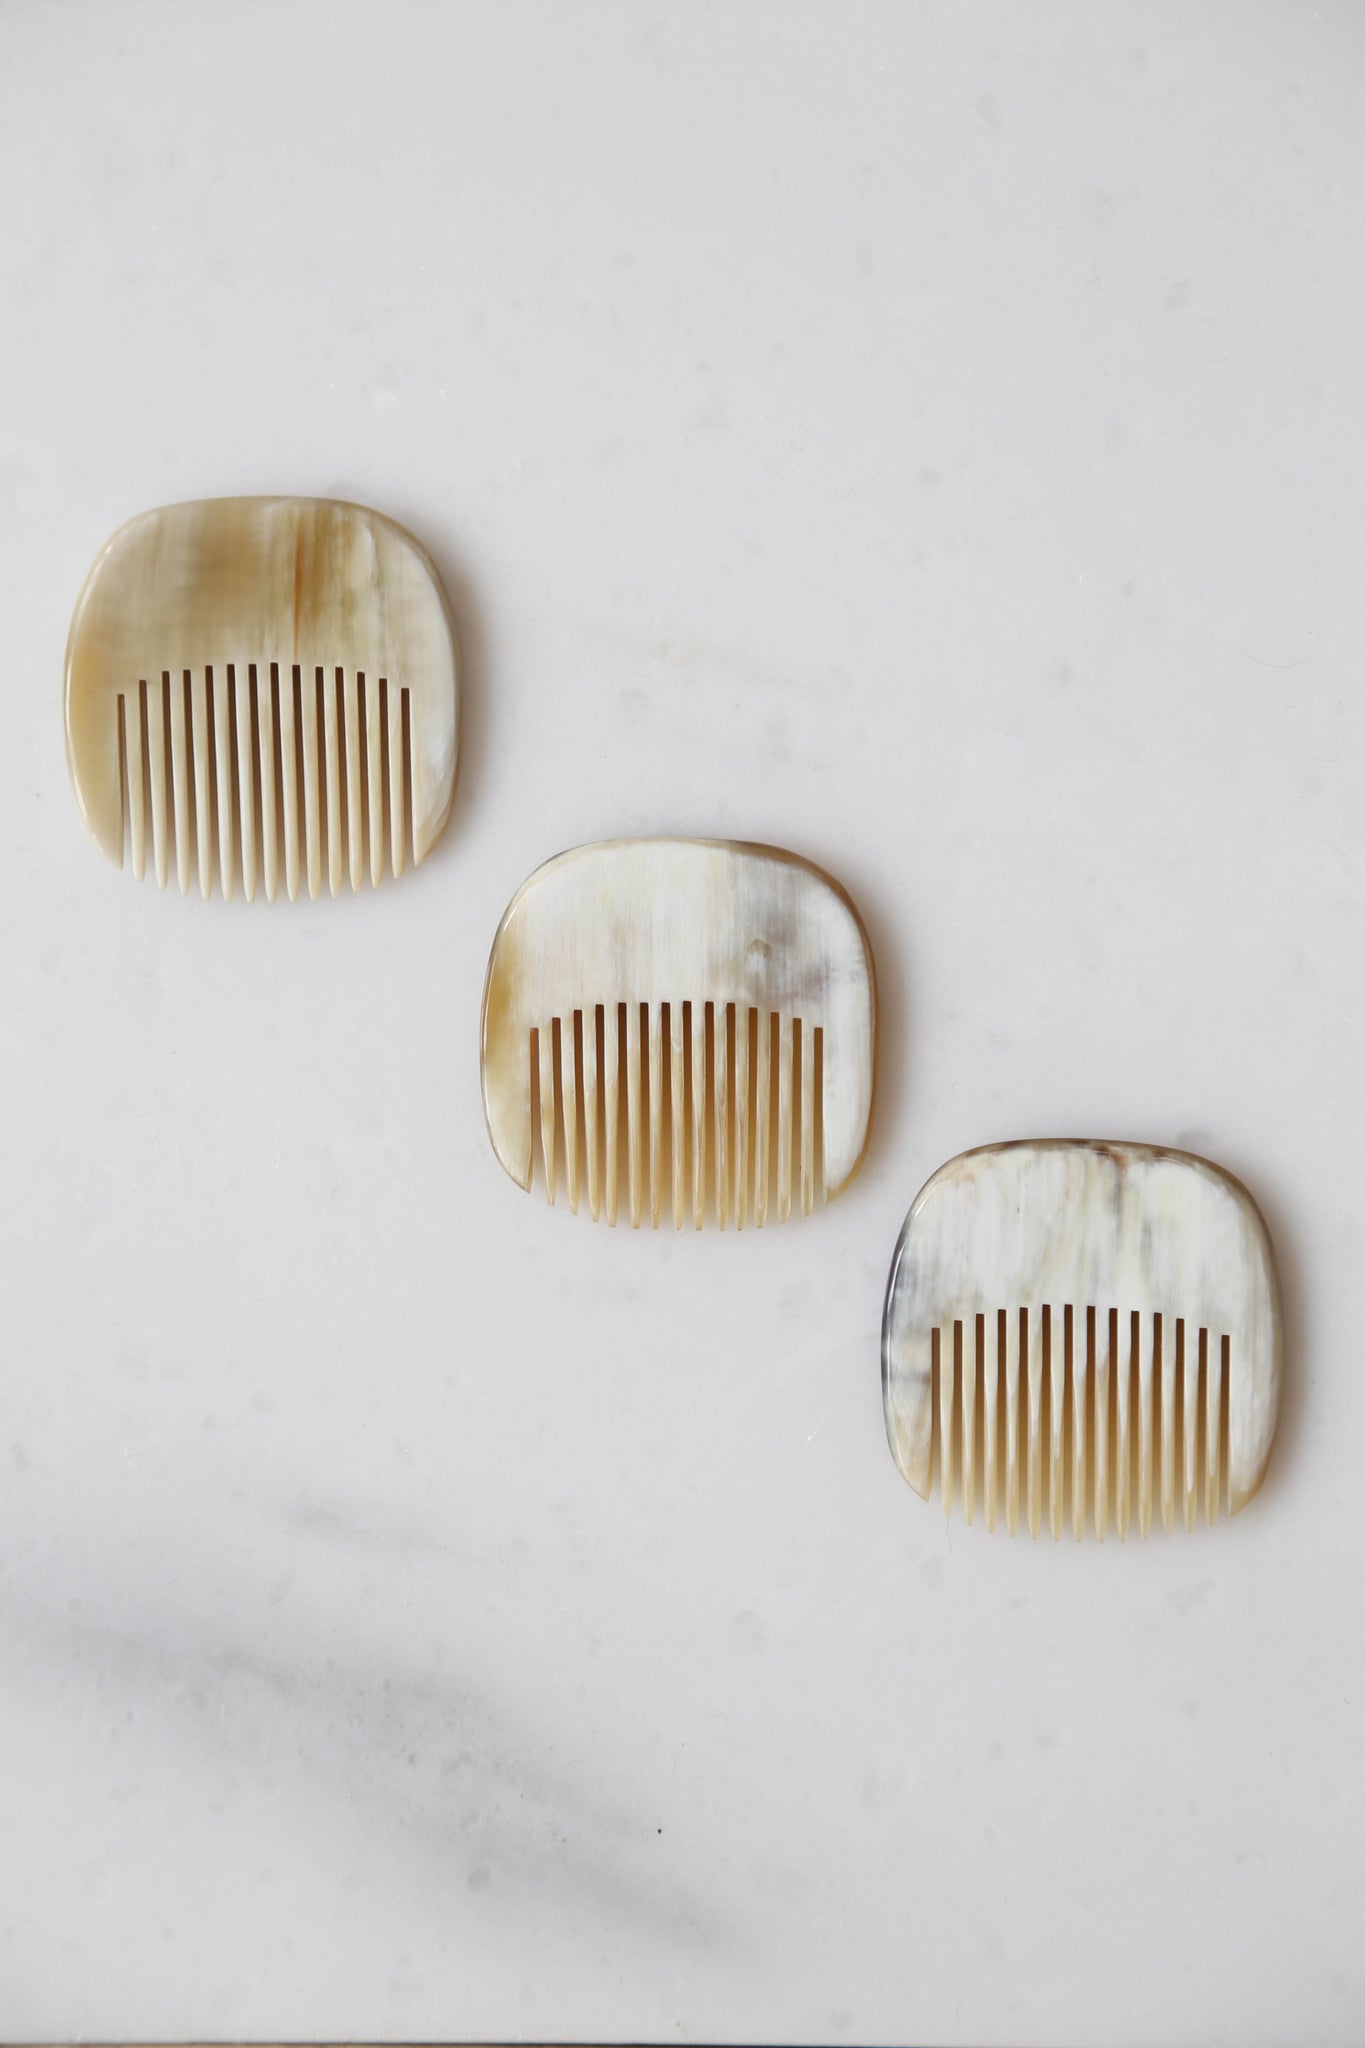 Horn Oval Comb in Cream